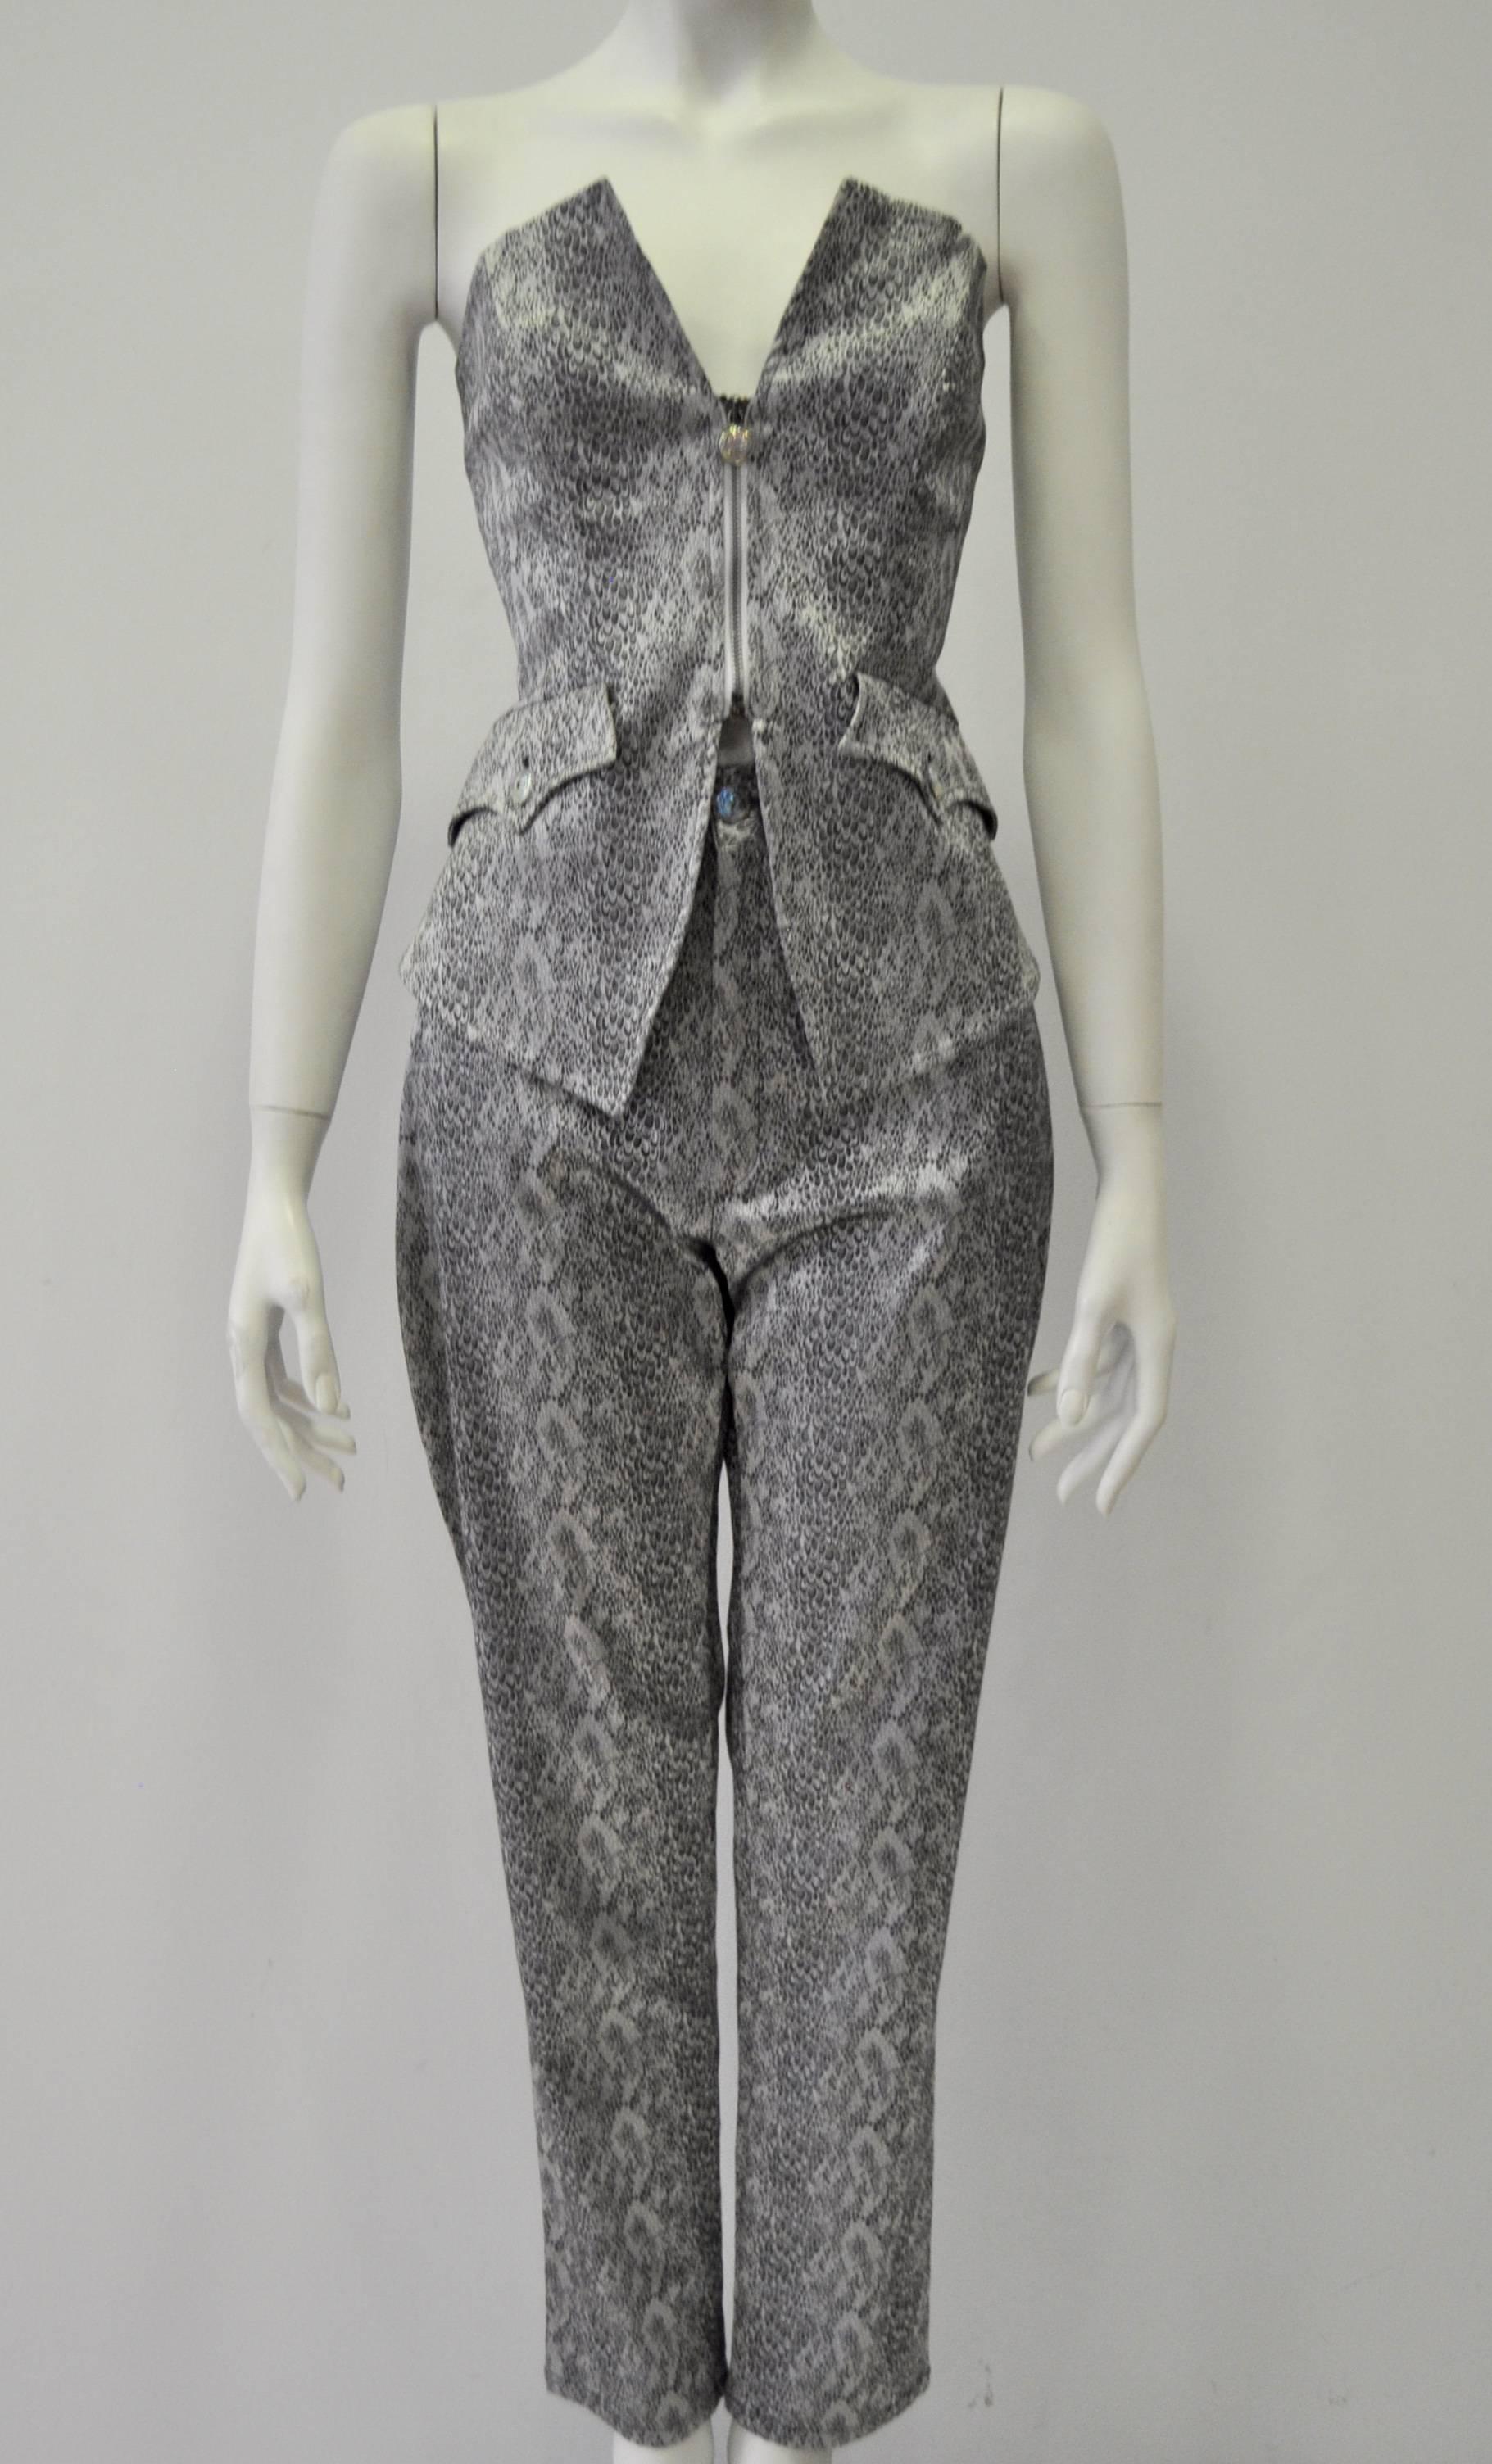 Sensational Bazar de Christian Lacroix Strapless Bustier Lustrous Snake Print Pantsuit Accented with Iridescent Buttons at Plackets and Front Zipper Pull